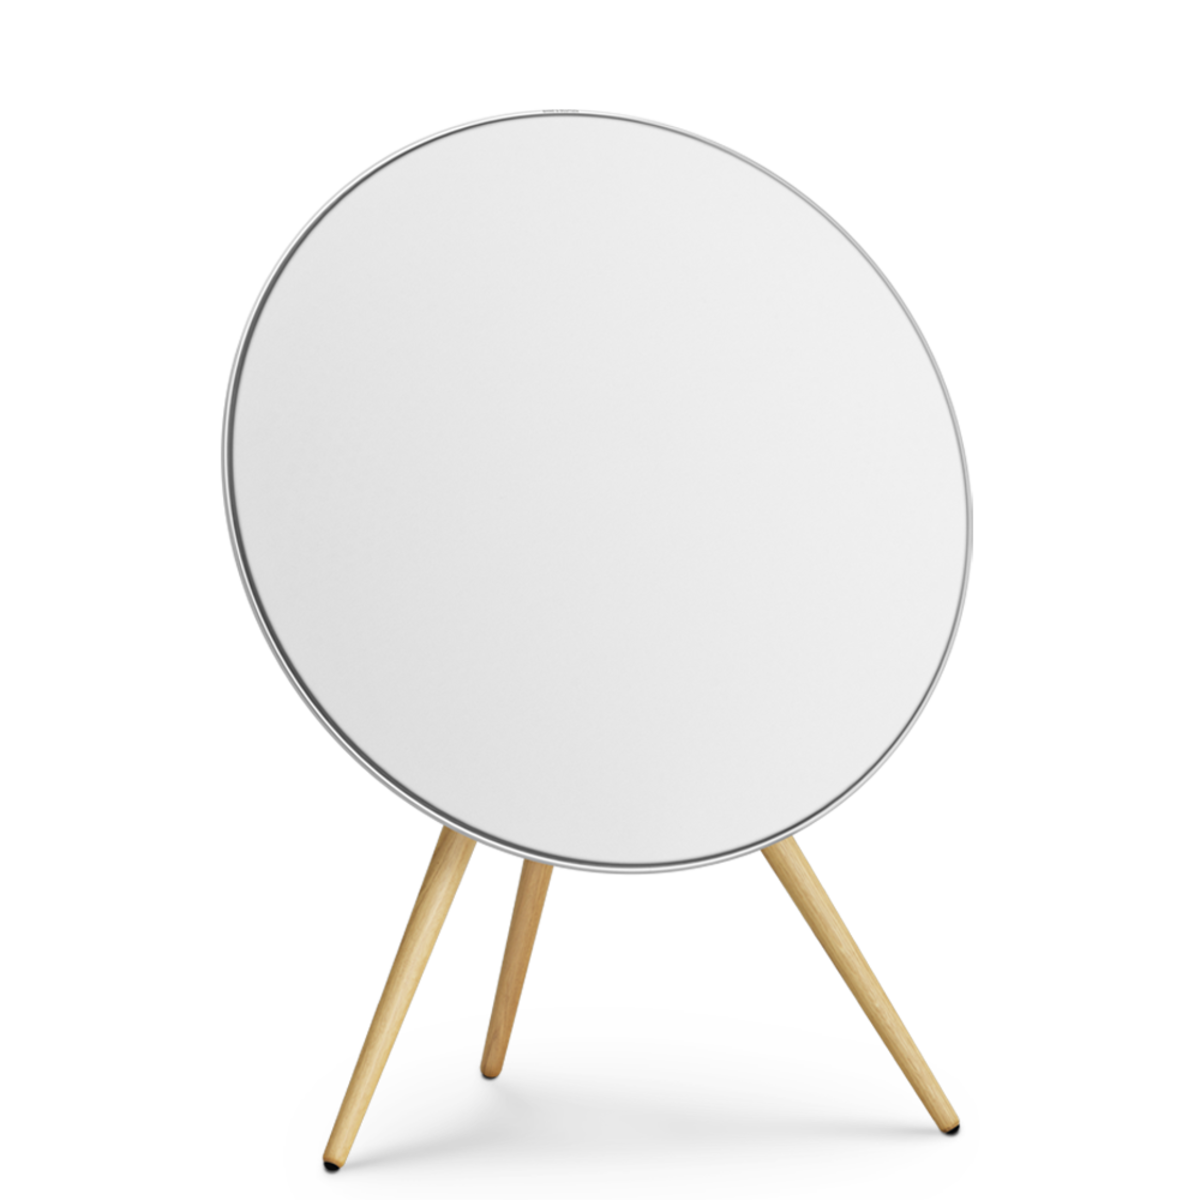 Bang & Olufsen Beoplay A9 4th Generation White/Oak 2